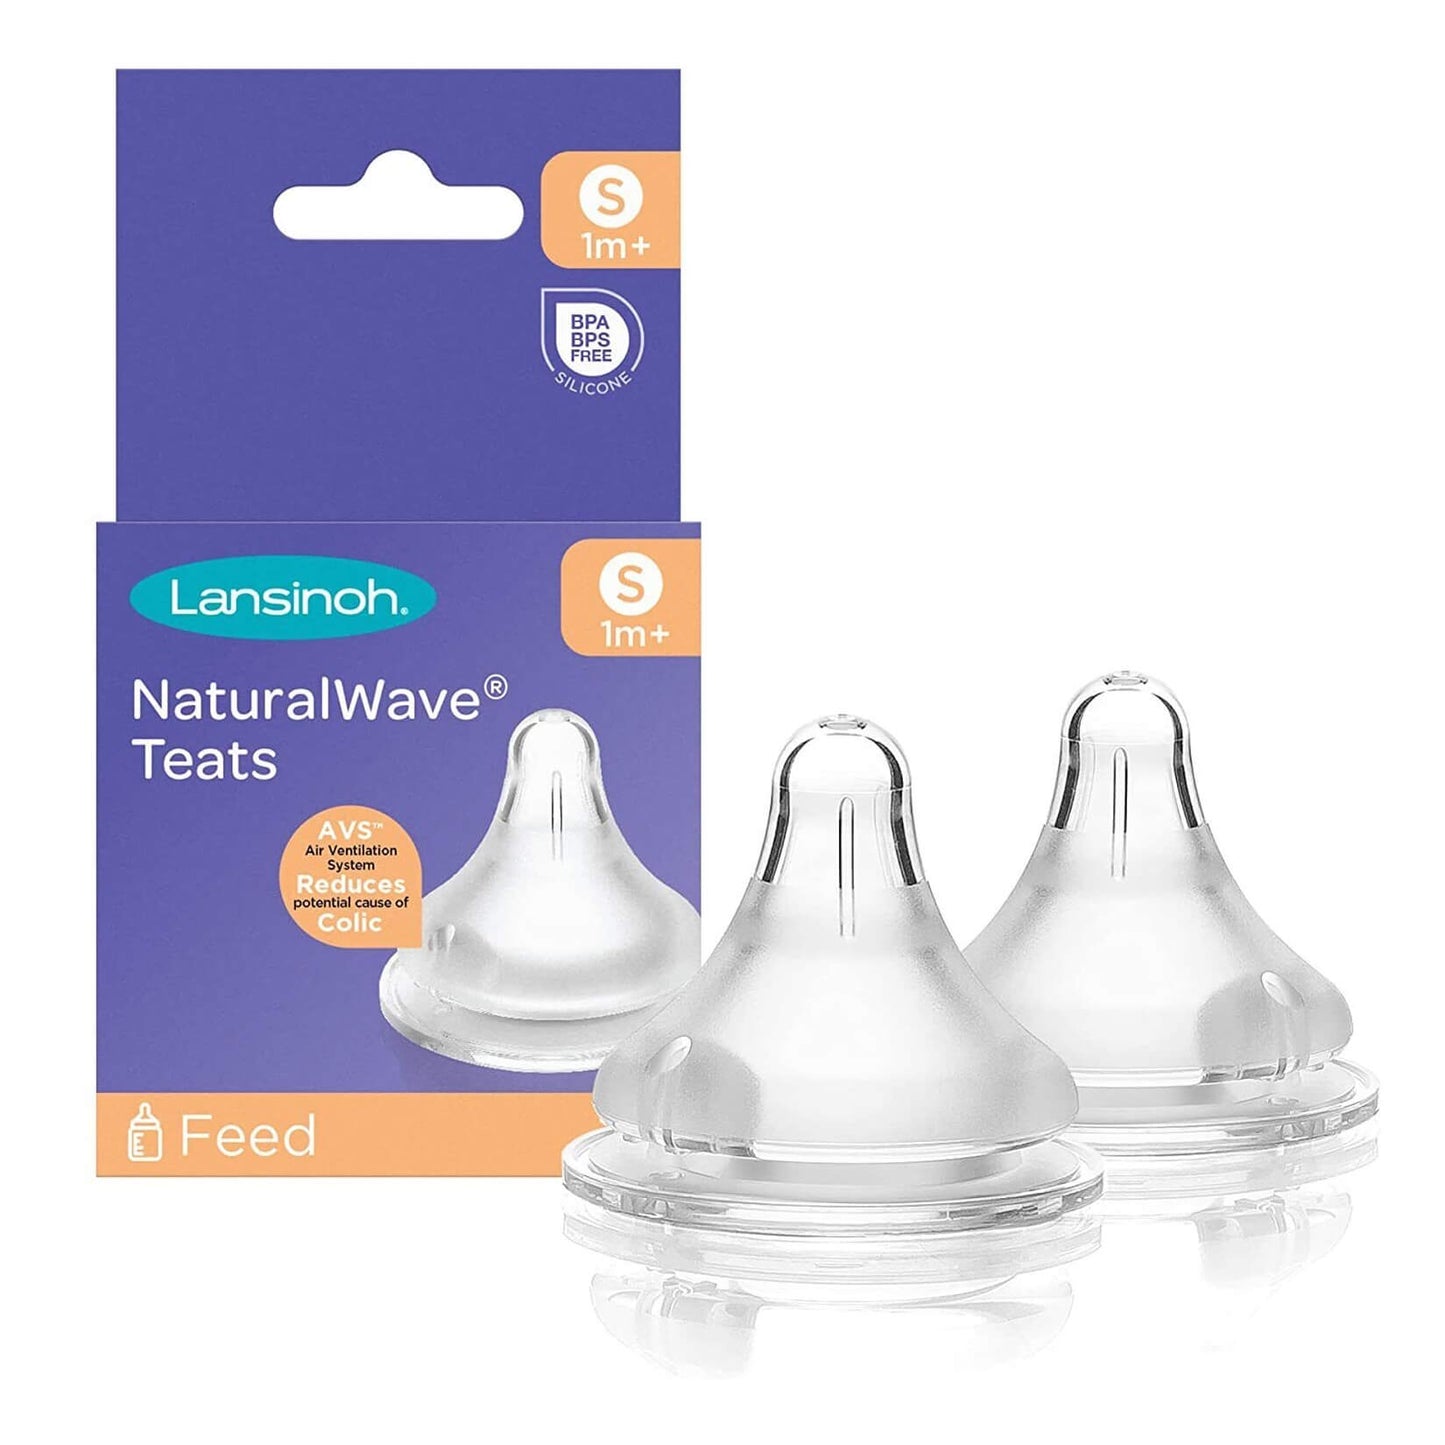 Lansinoh NaturalWave® Teat is designed to encourage the same peristaltic tongue movements babies use at the breast. Therefore reducing nipple confusion and maintaining good oral development.